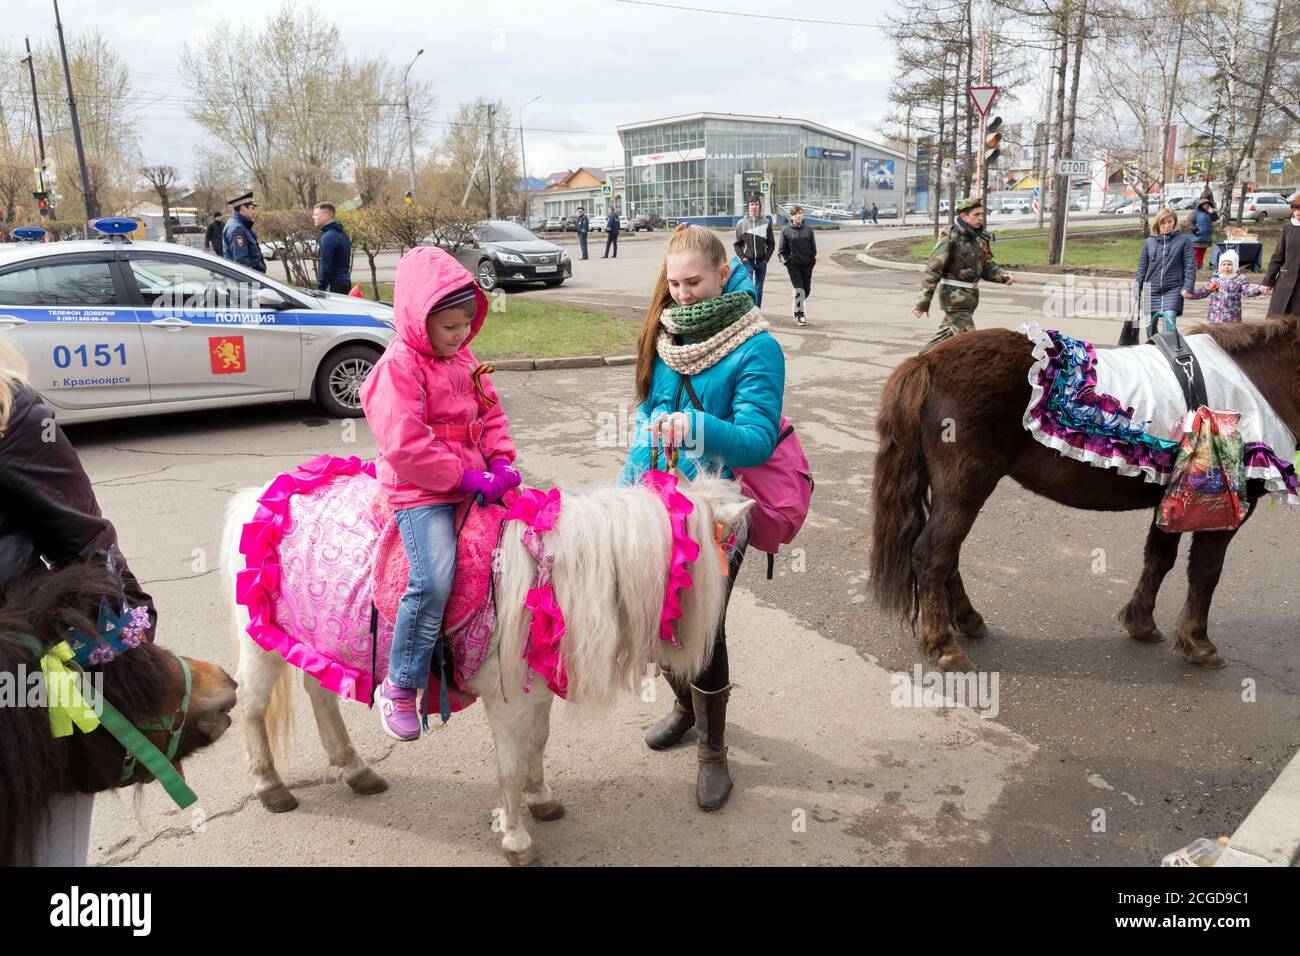 ittle girl sits on a pony, a girl is standing next to her, against the background of a police car during the celebration of Victory Day WWII Stock Photo